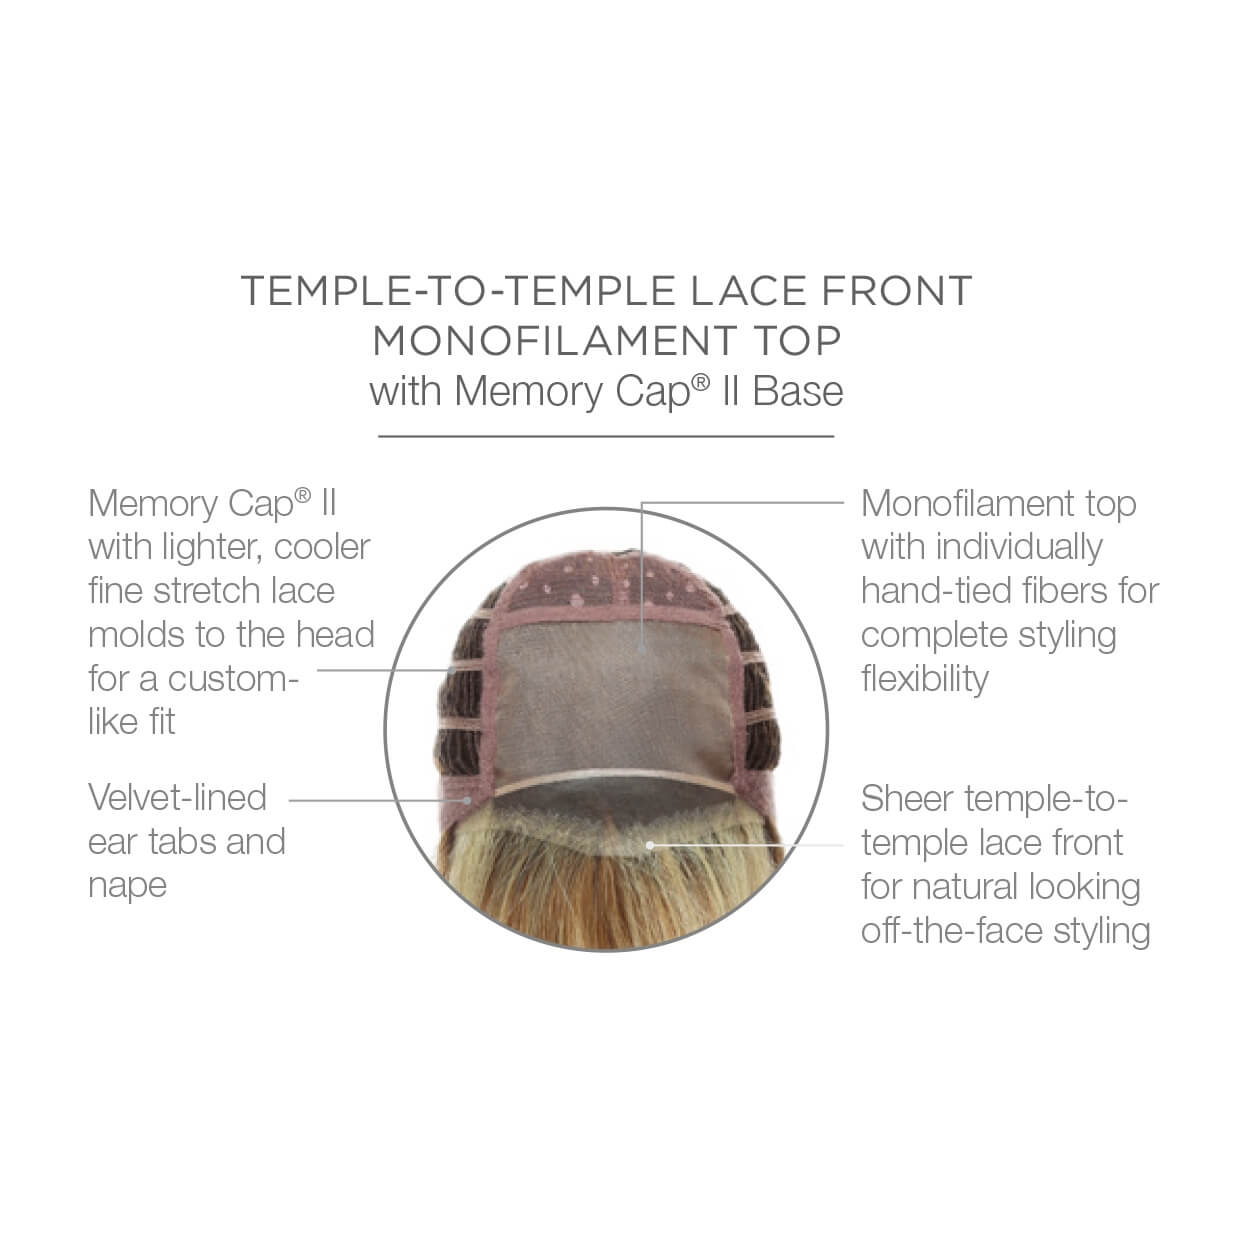 Temple to temple lace front monofilament top with Memory Cap II Base